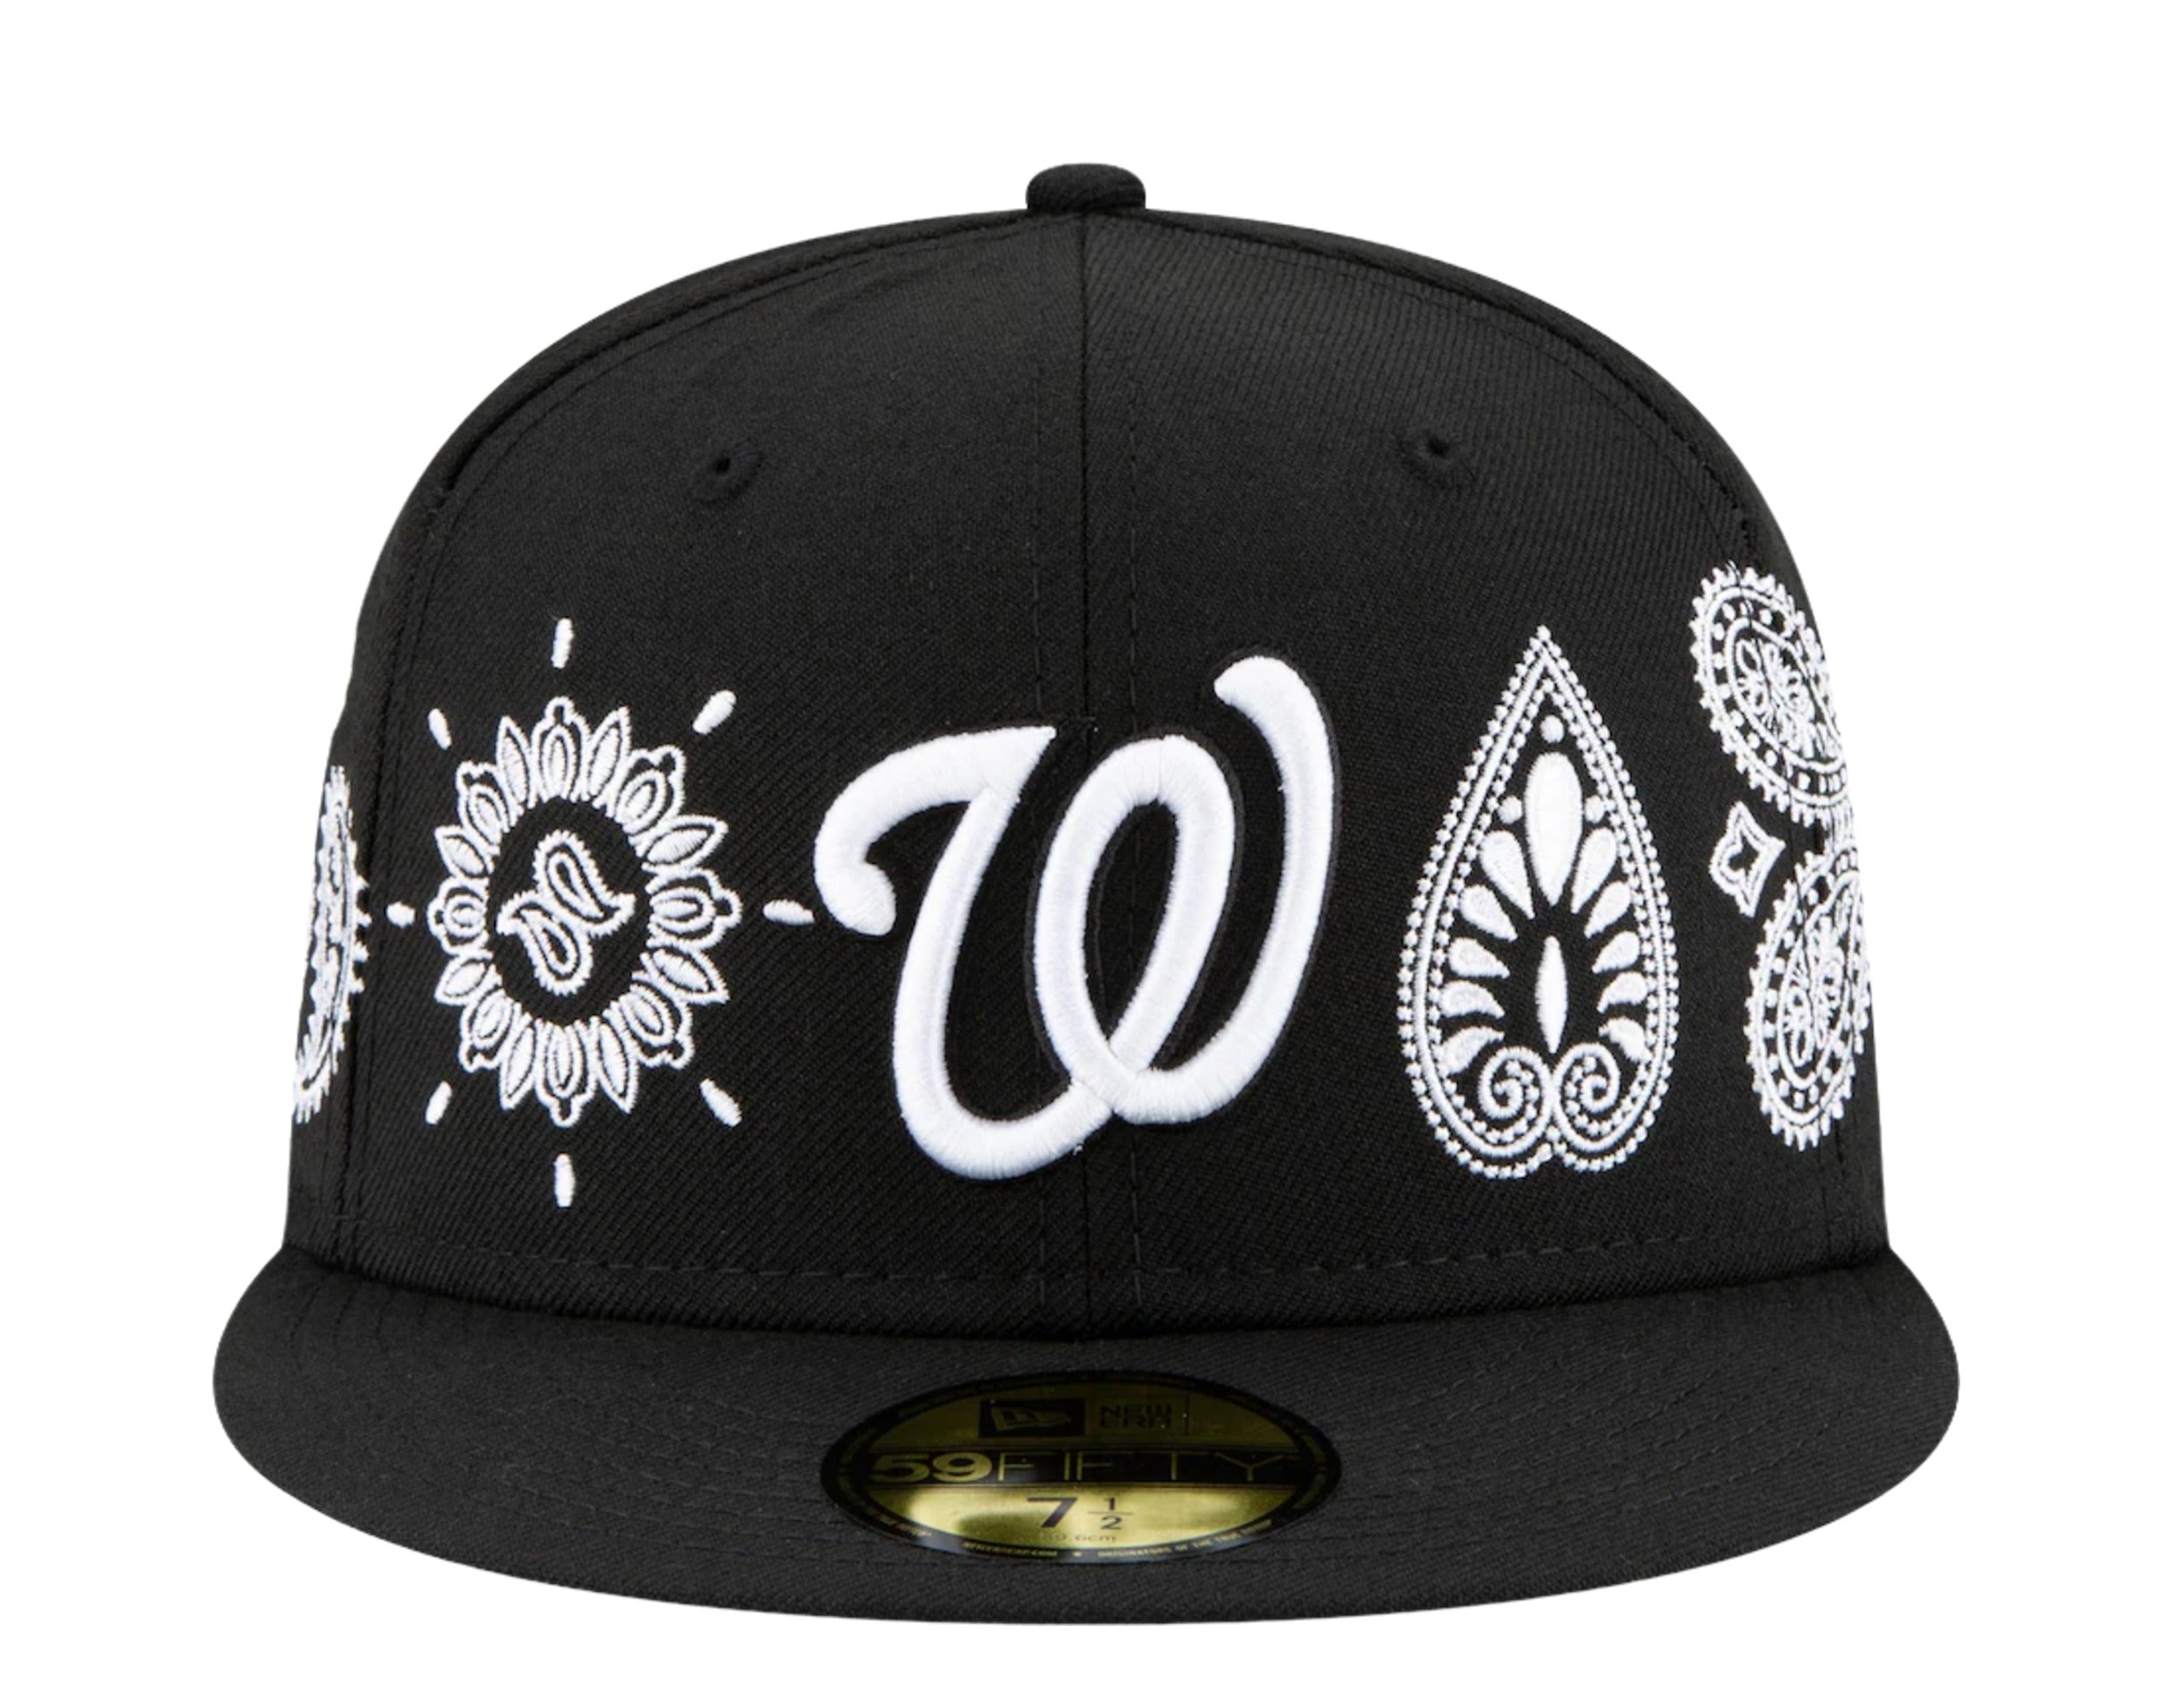 Brooklyn Nets PAISLEY ELEMENTS Black Fitted Hat by New Era